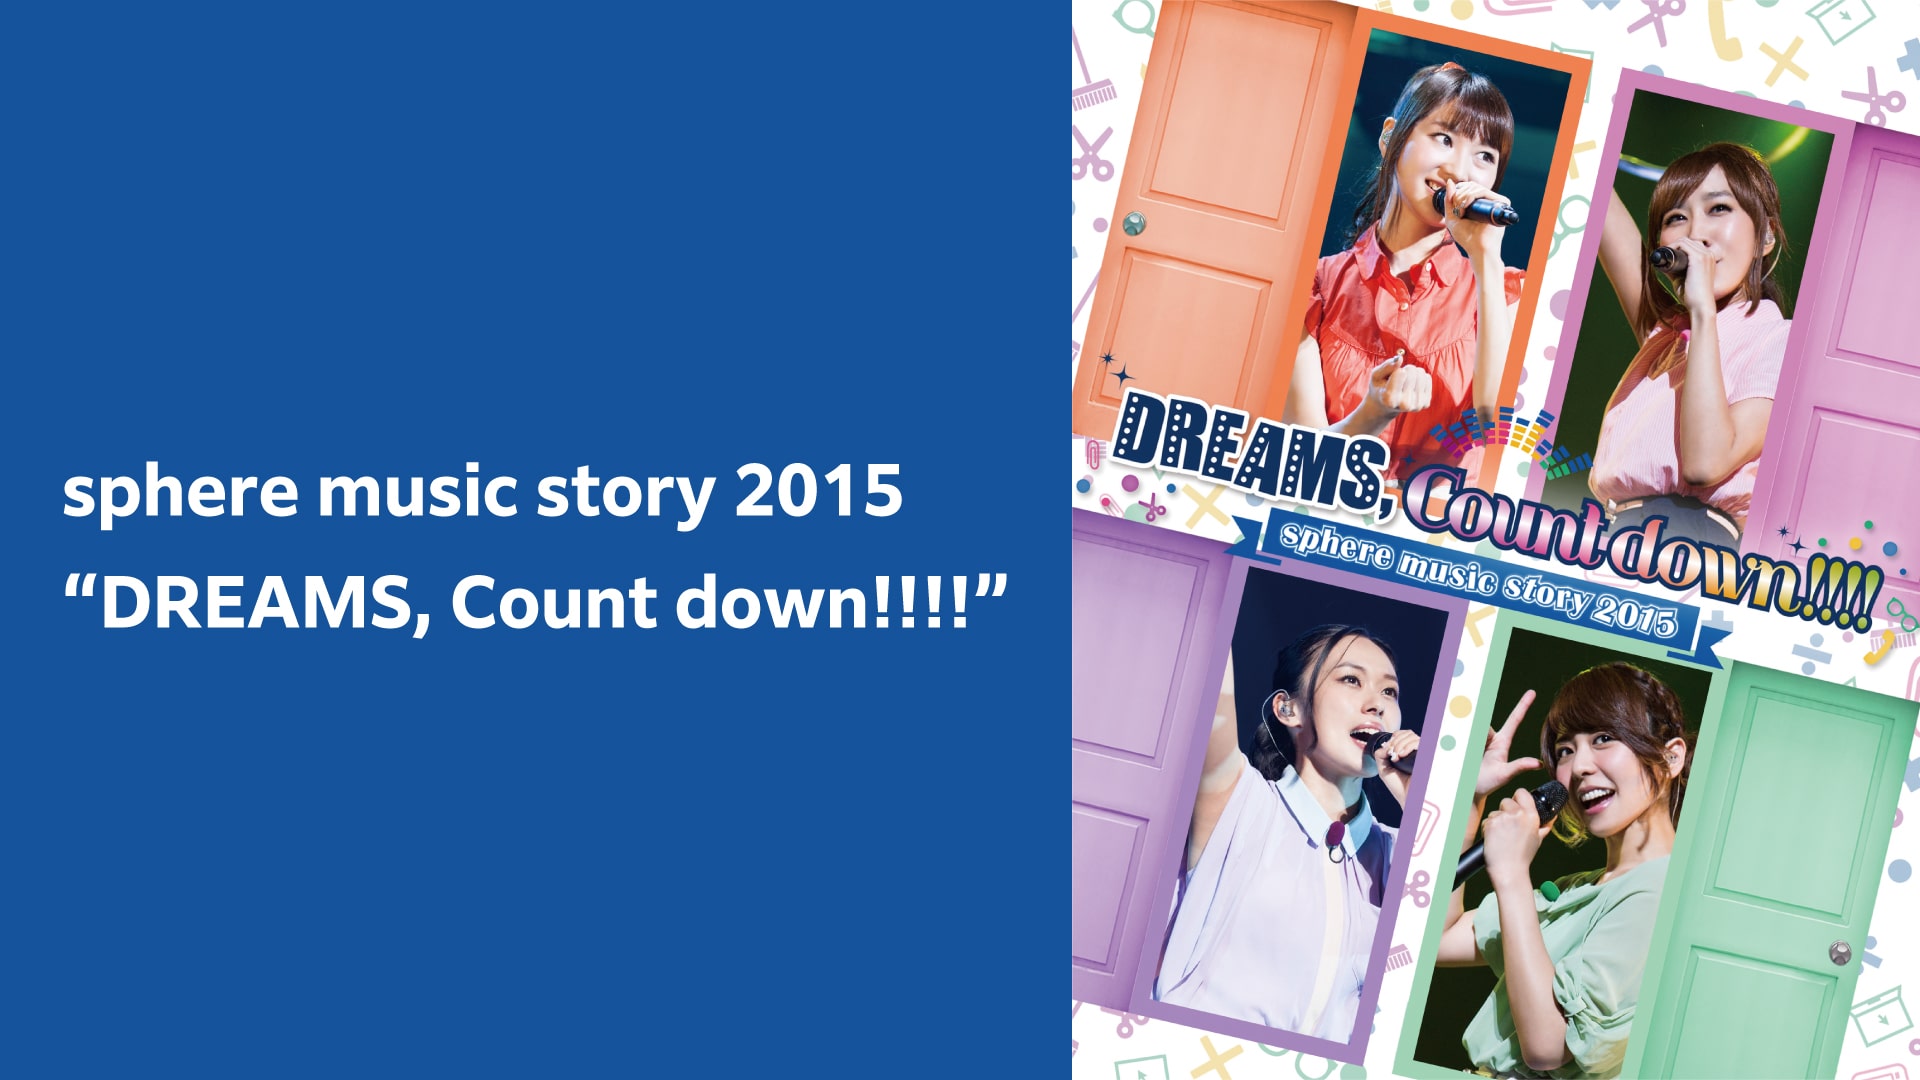 sphere music story 2015 “DREAMS, Count down!!!!”